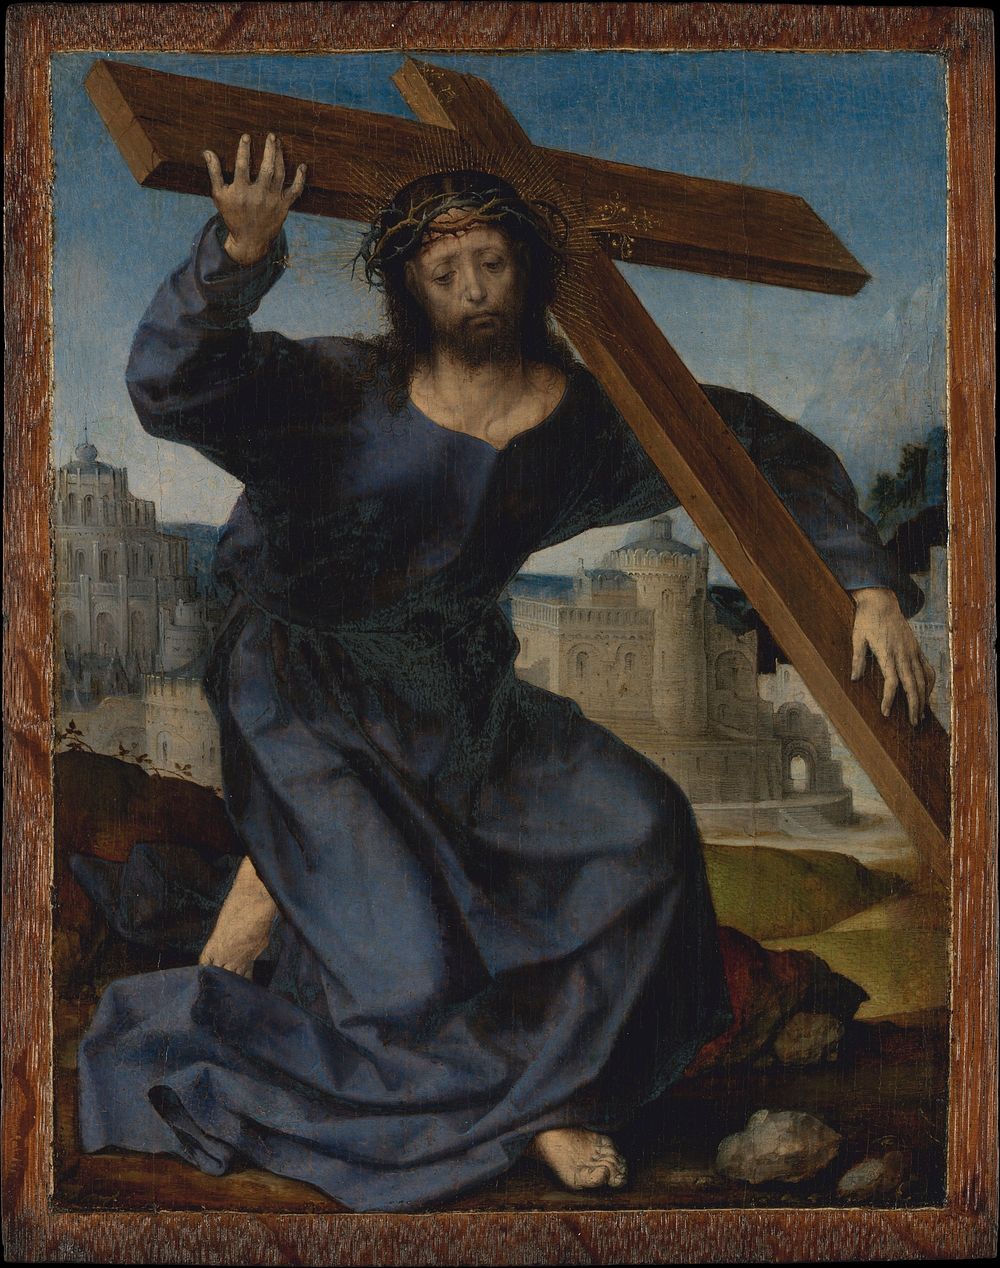 Christ Carrying the Cross by Jan Gossart (called Mabuse)